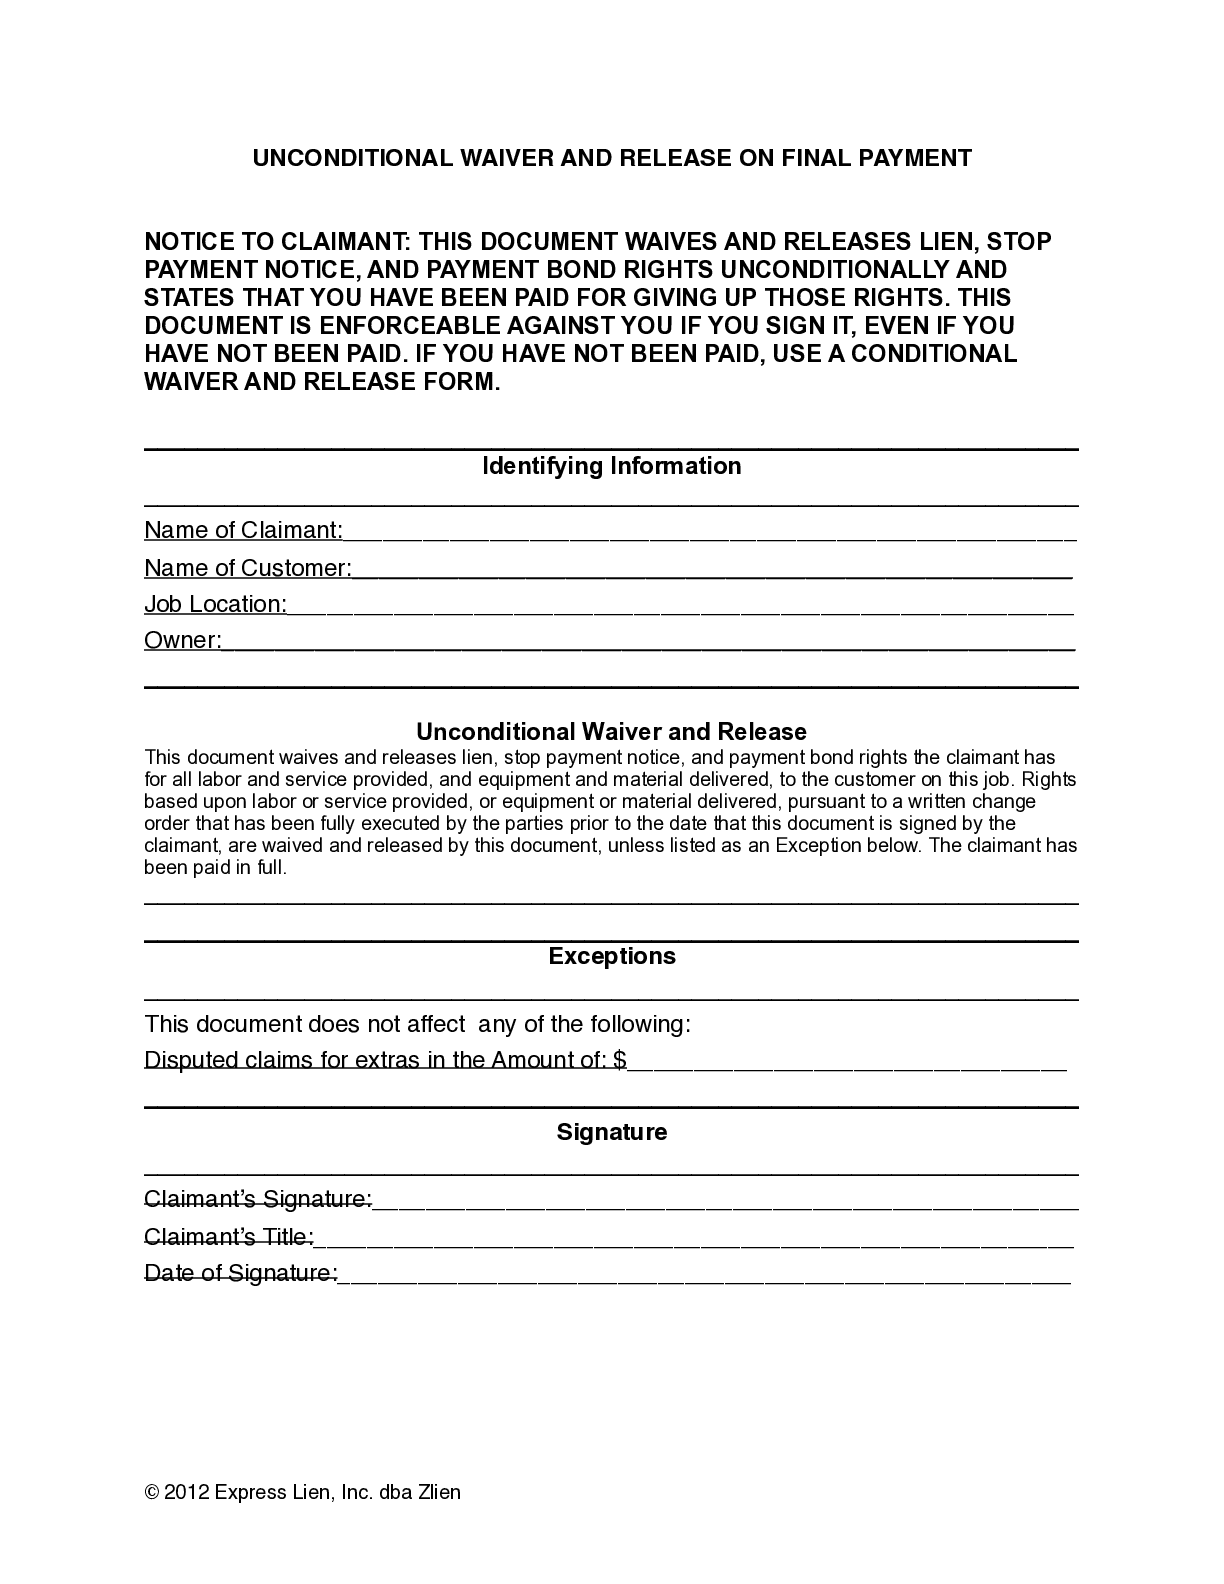 Washington DC Final Unconditional Lien Waiver Form - free from